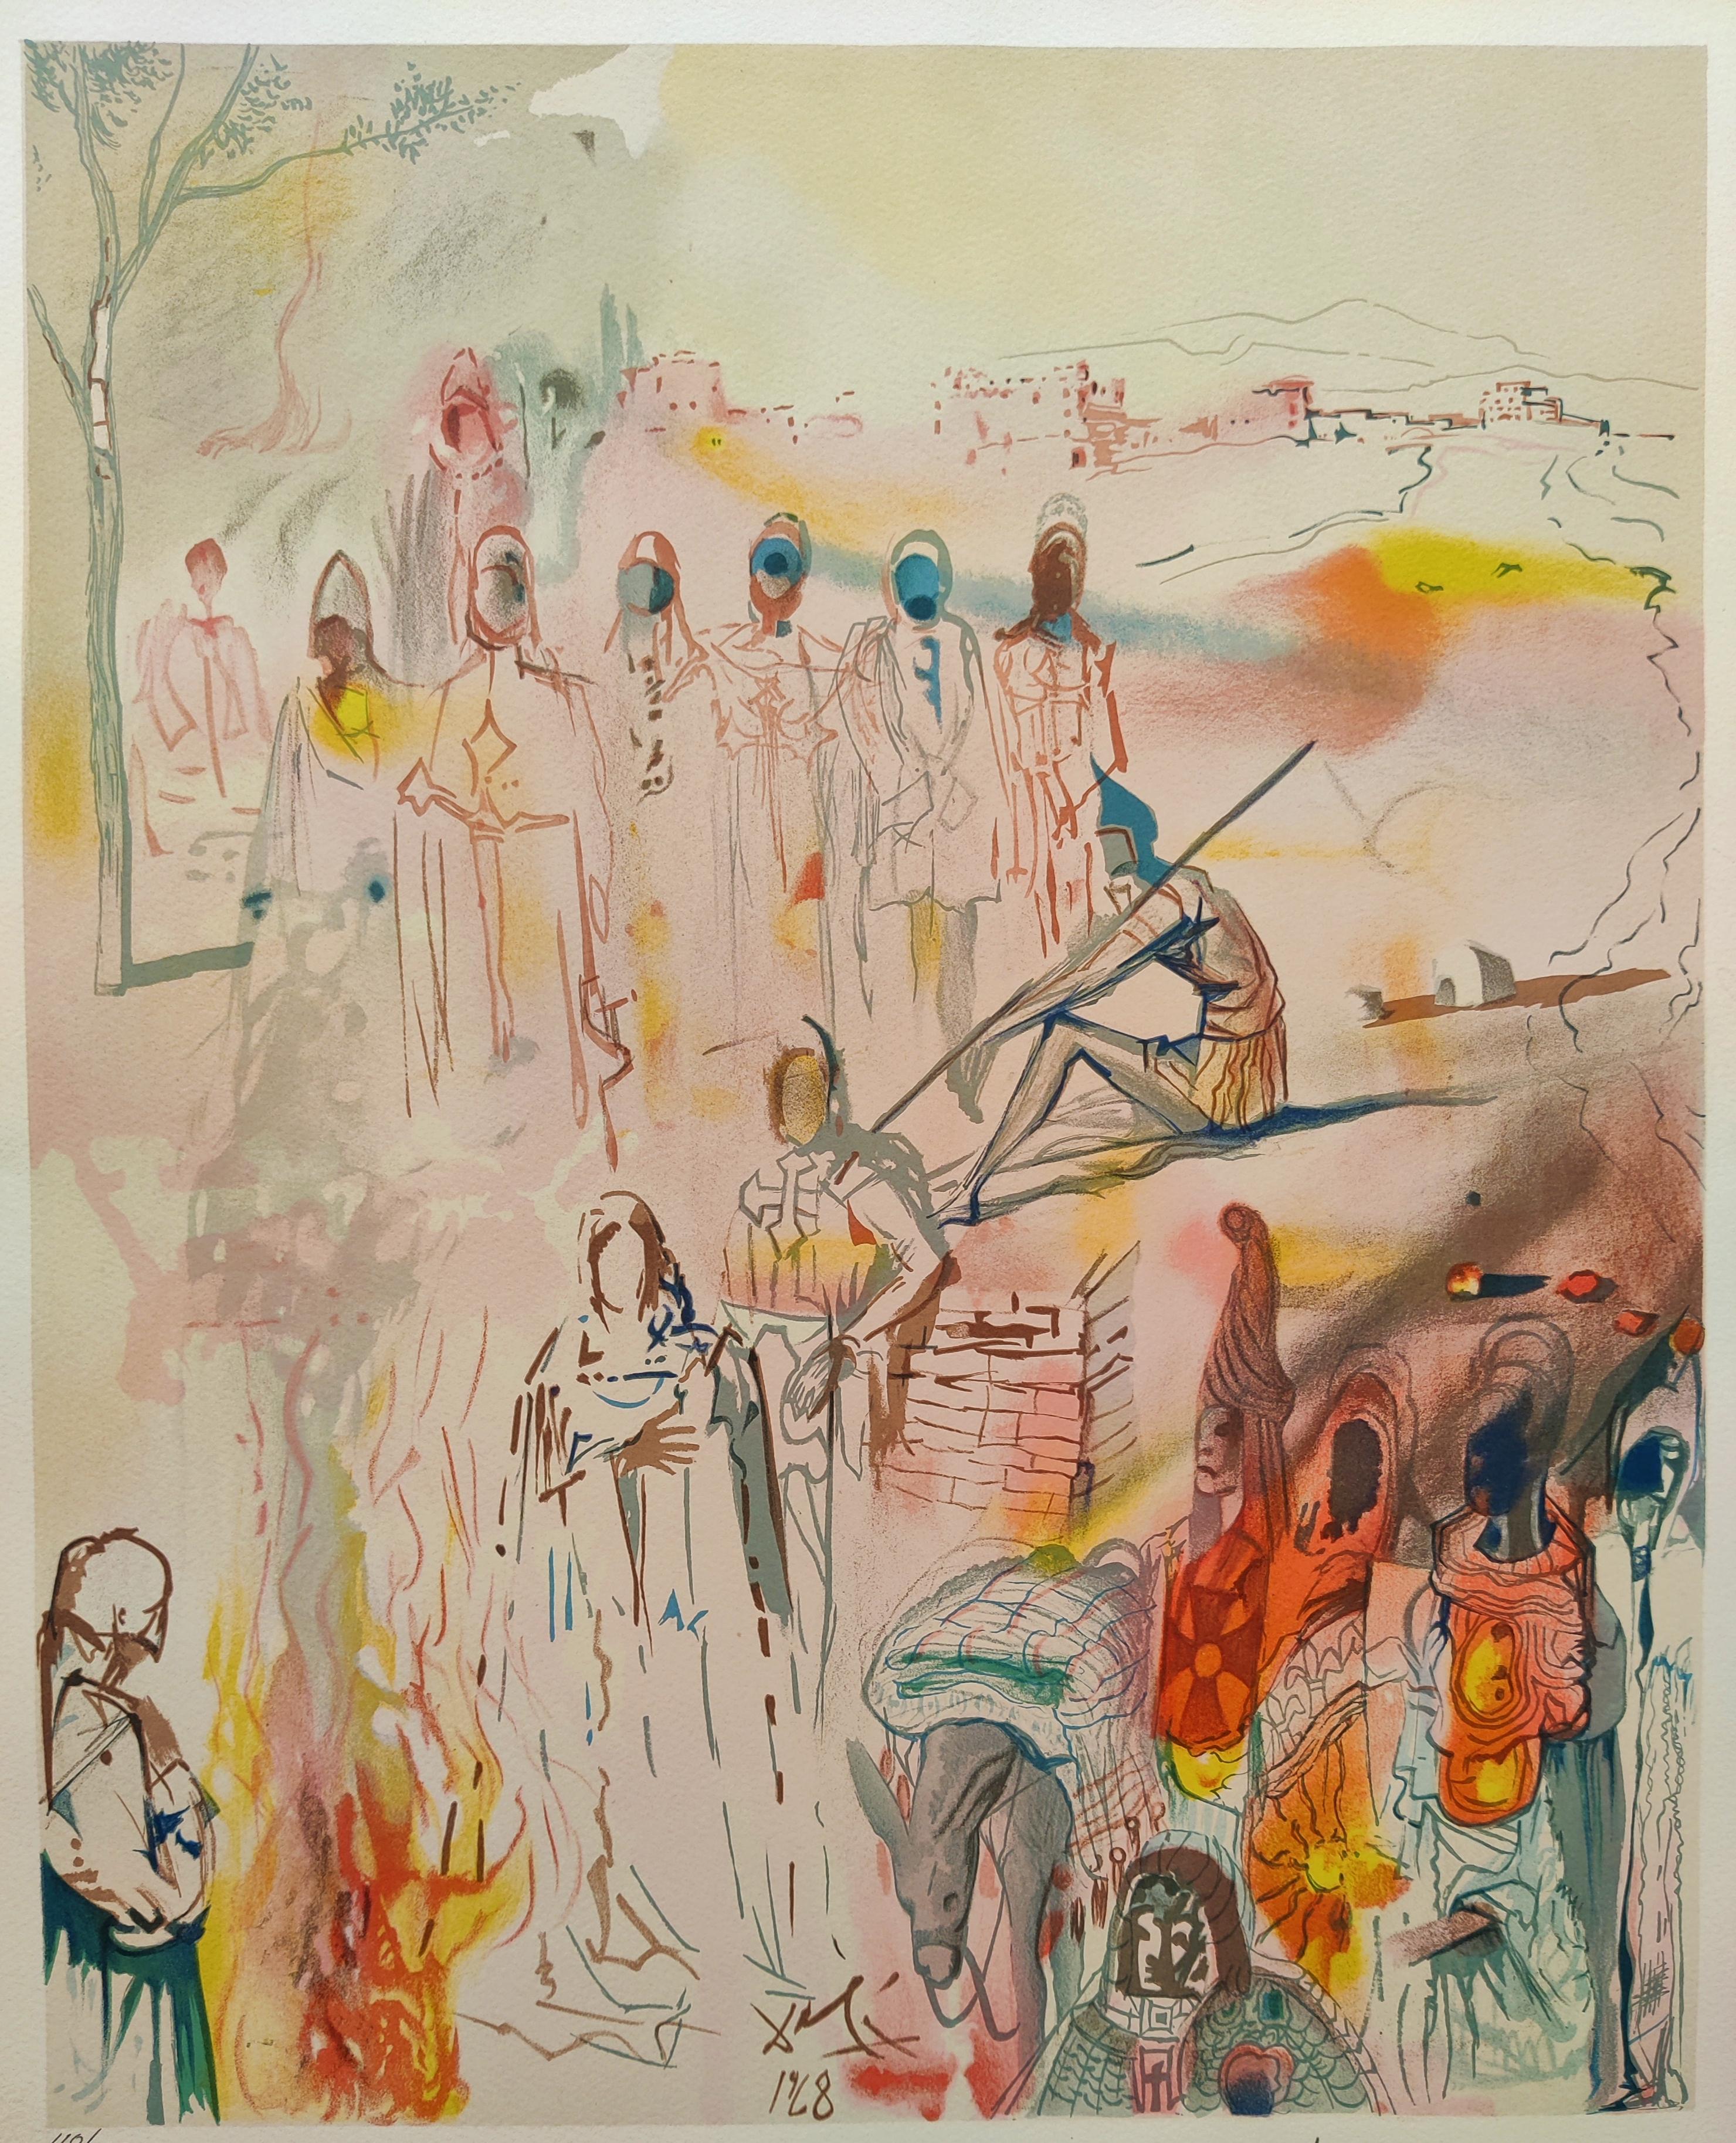 Salvador Dali
Tancreds Oath from Marquis de Sade Suite, 1969
Lithograph 
Edition  110/160
Hand signed lower right
Image size: 53 X 42.5 cm
Sheet size: 65 x 50 cm
Published by Shorewood Publishers New York
Reference: Field 69-1 X
Unframed
